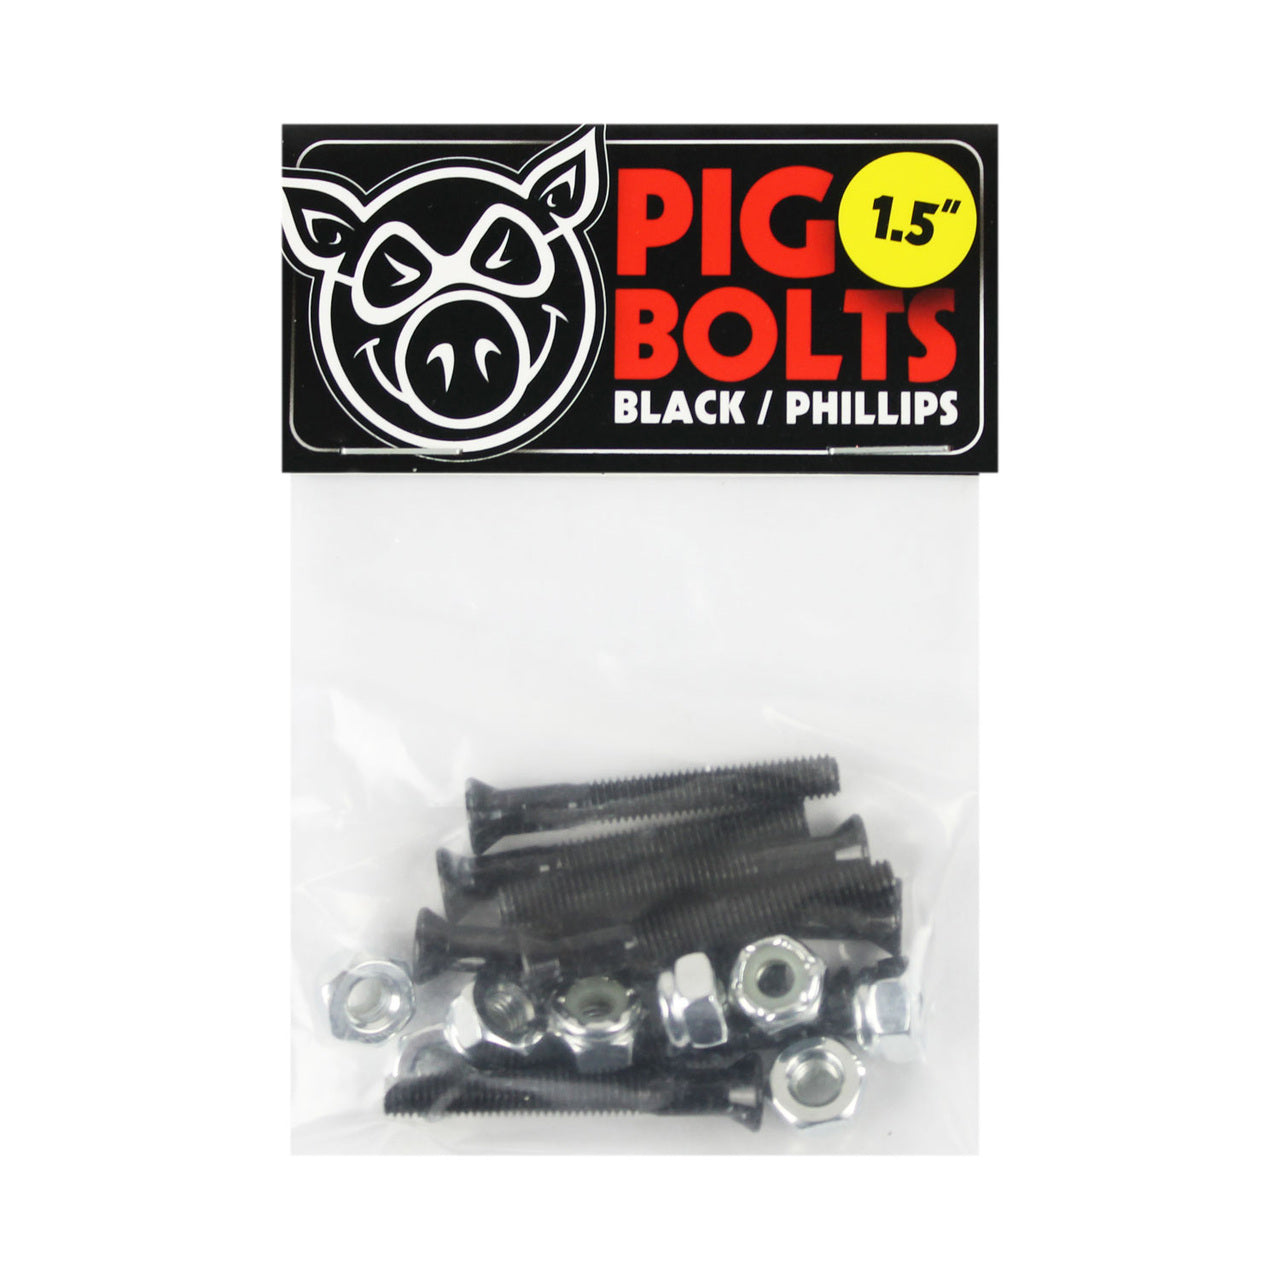 Pig Phillips Hardware Blk (size options listed)